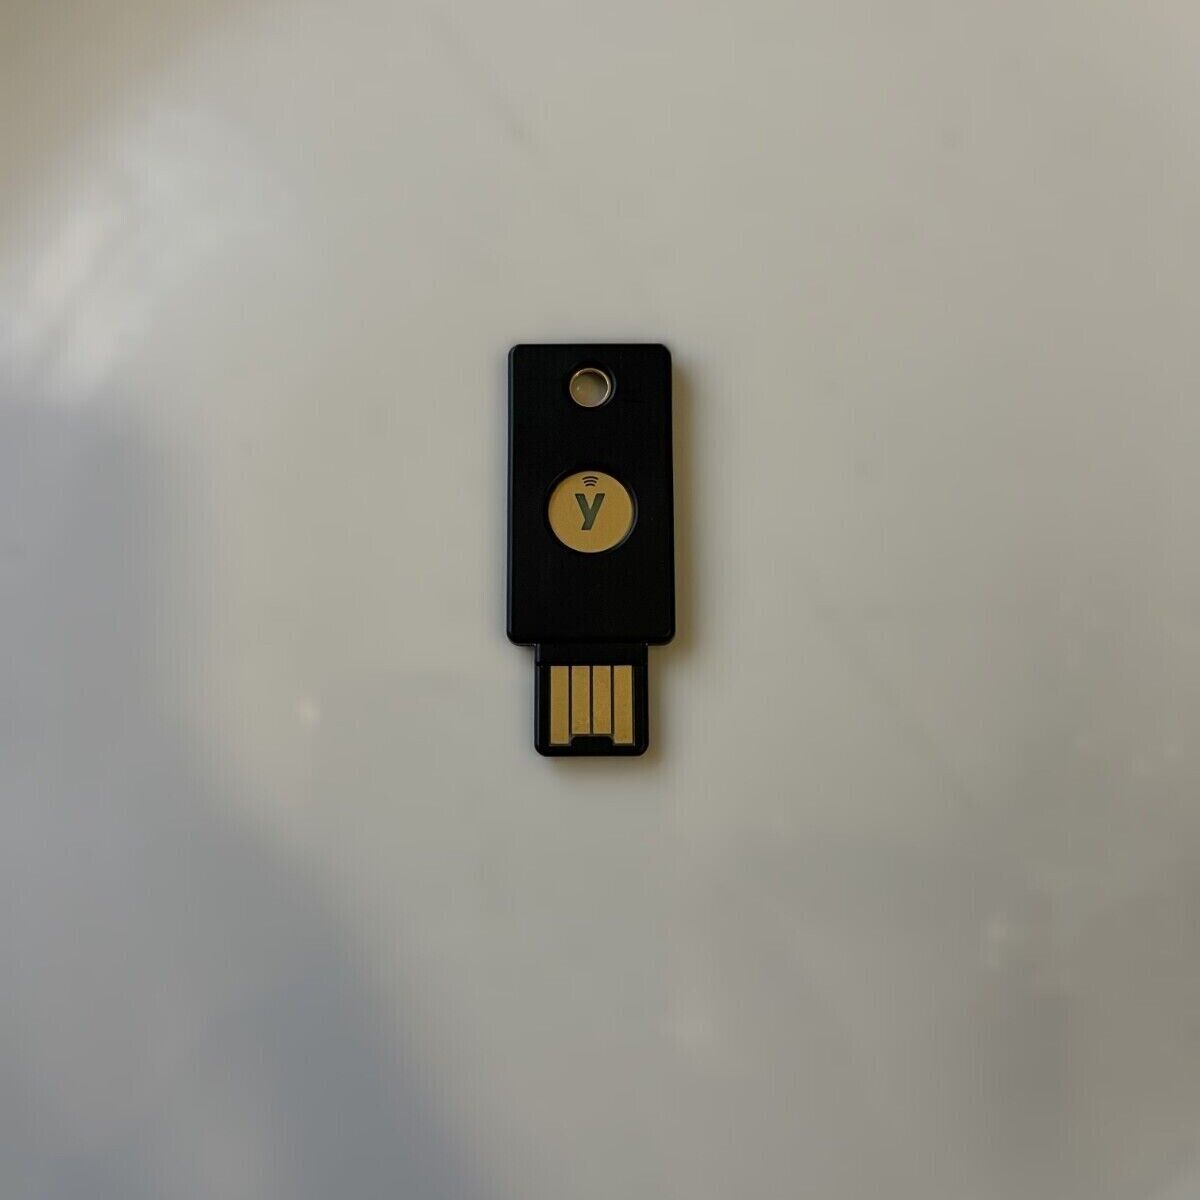 Yubico YubiKey 5 NFC Two Factor Authentication USB and NFC Security Key